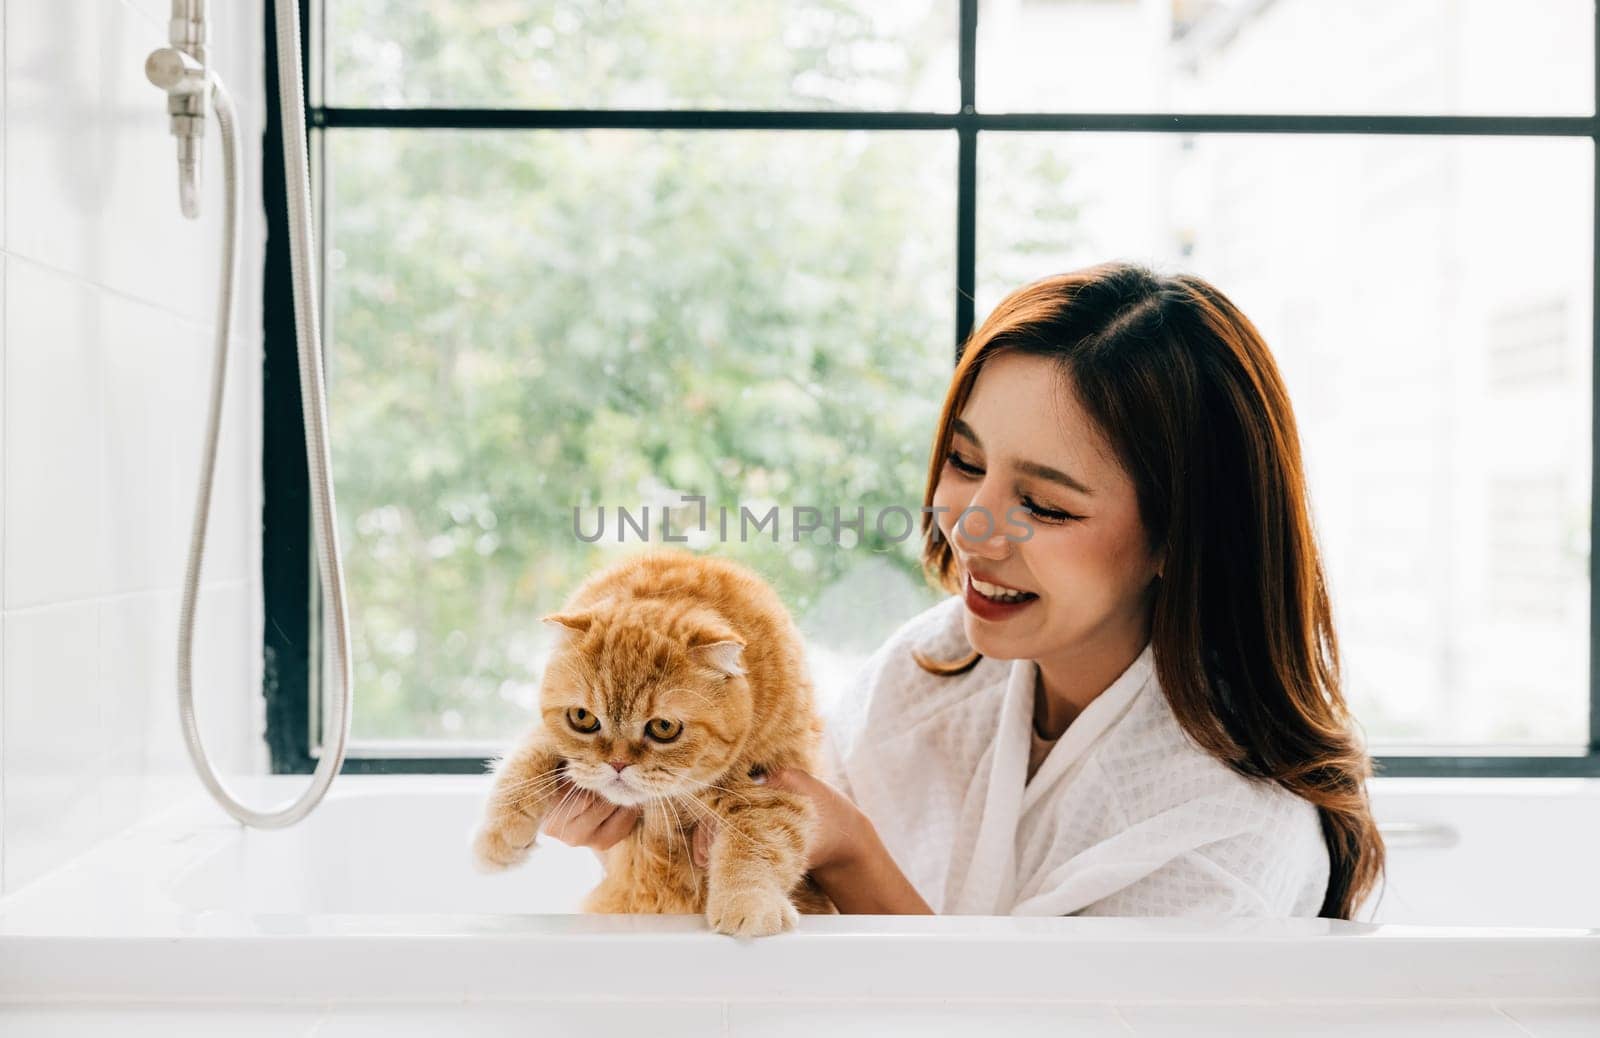 Indulging in a spa-like bath, a smiling woman shares a bathtub with her Scottish Fold cat, a heartwarming scene of relaxation and pet care.